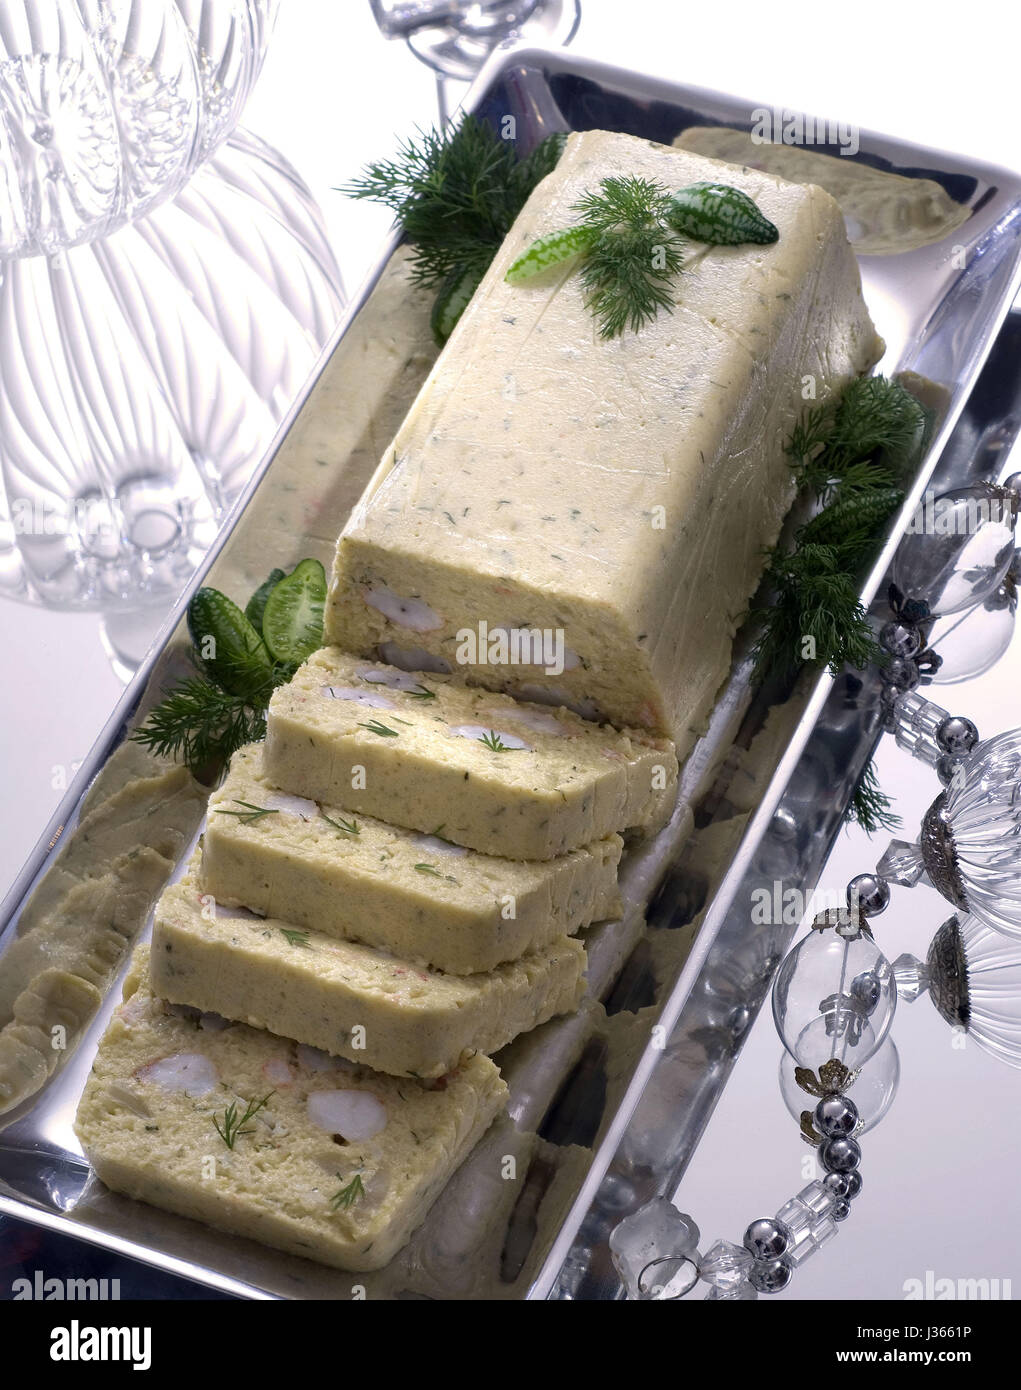 December, Christmas dinner with strass: terrine with cream of fennel and scampis Stock Photo